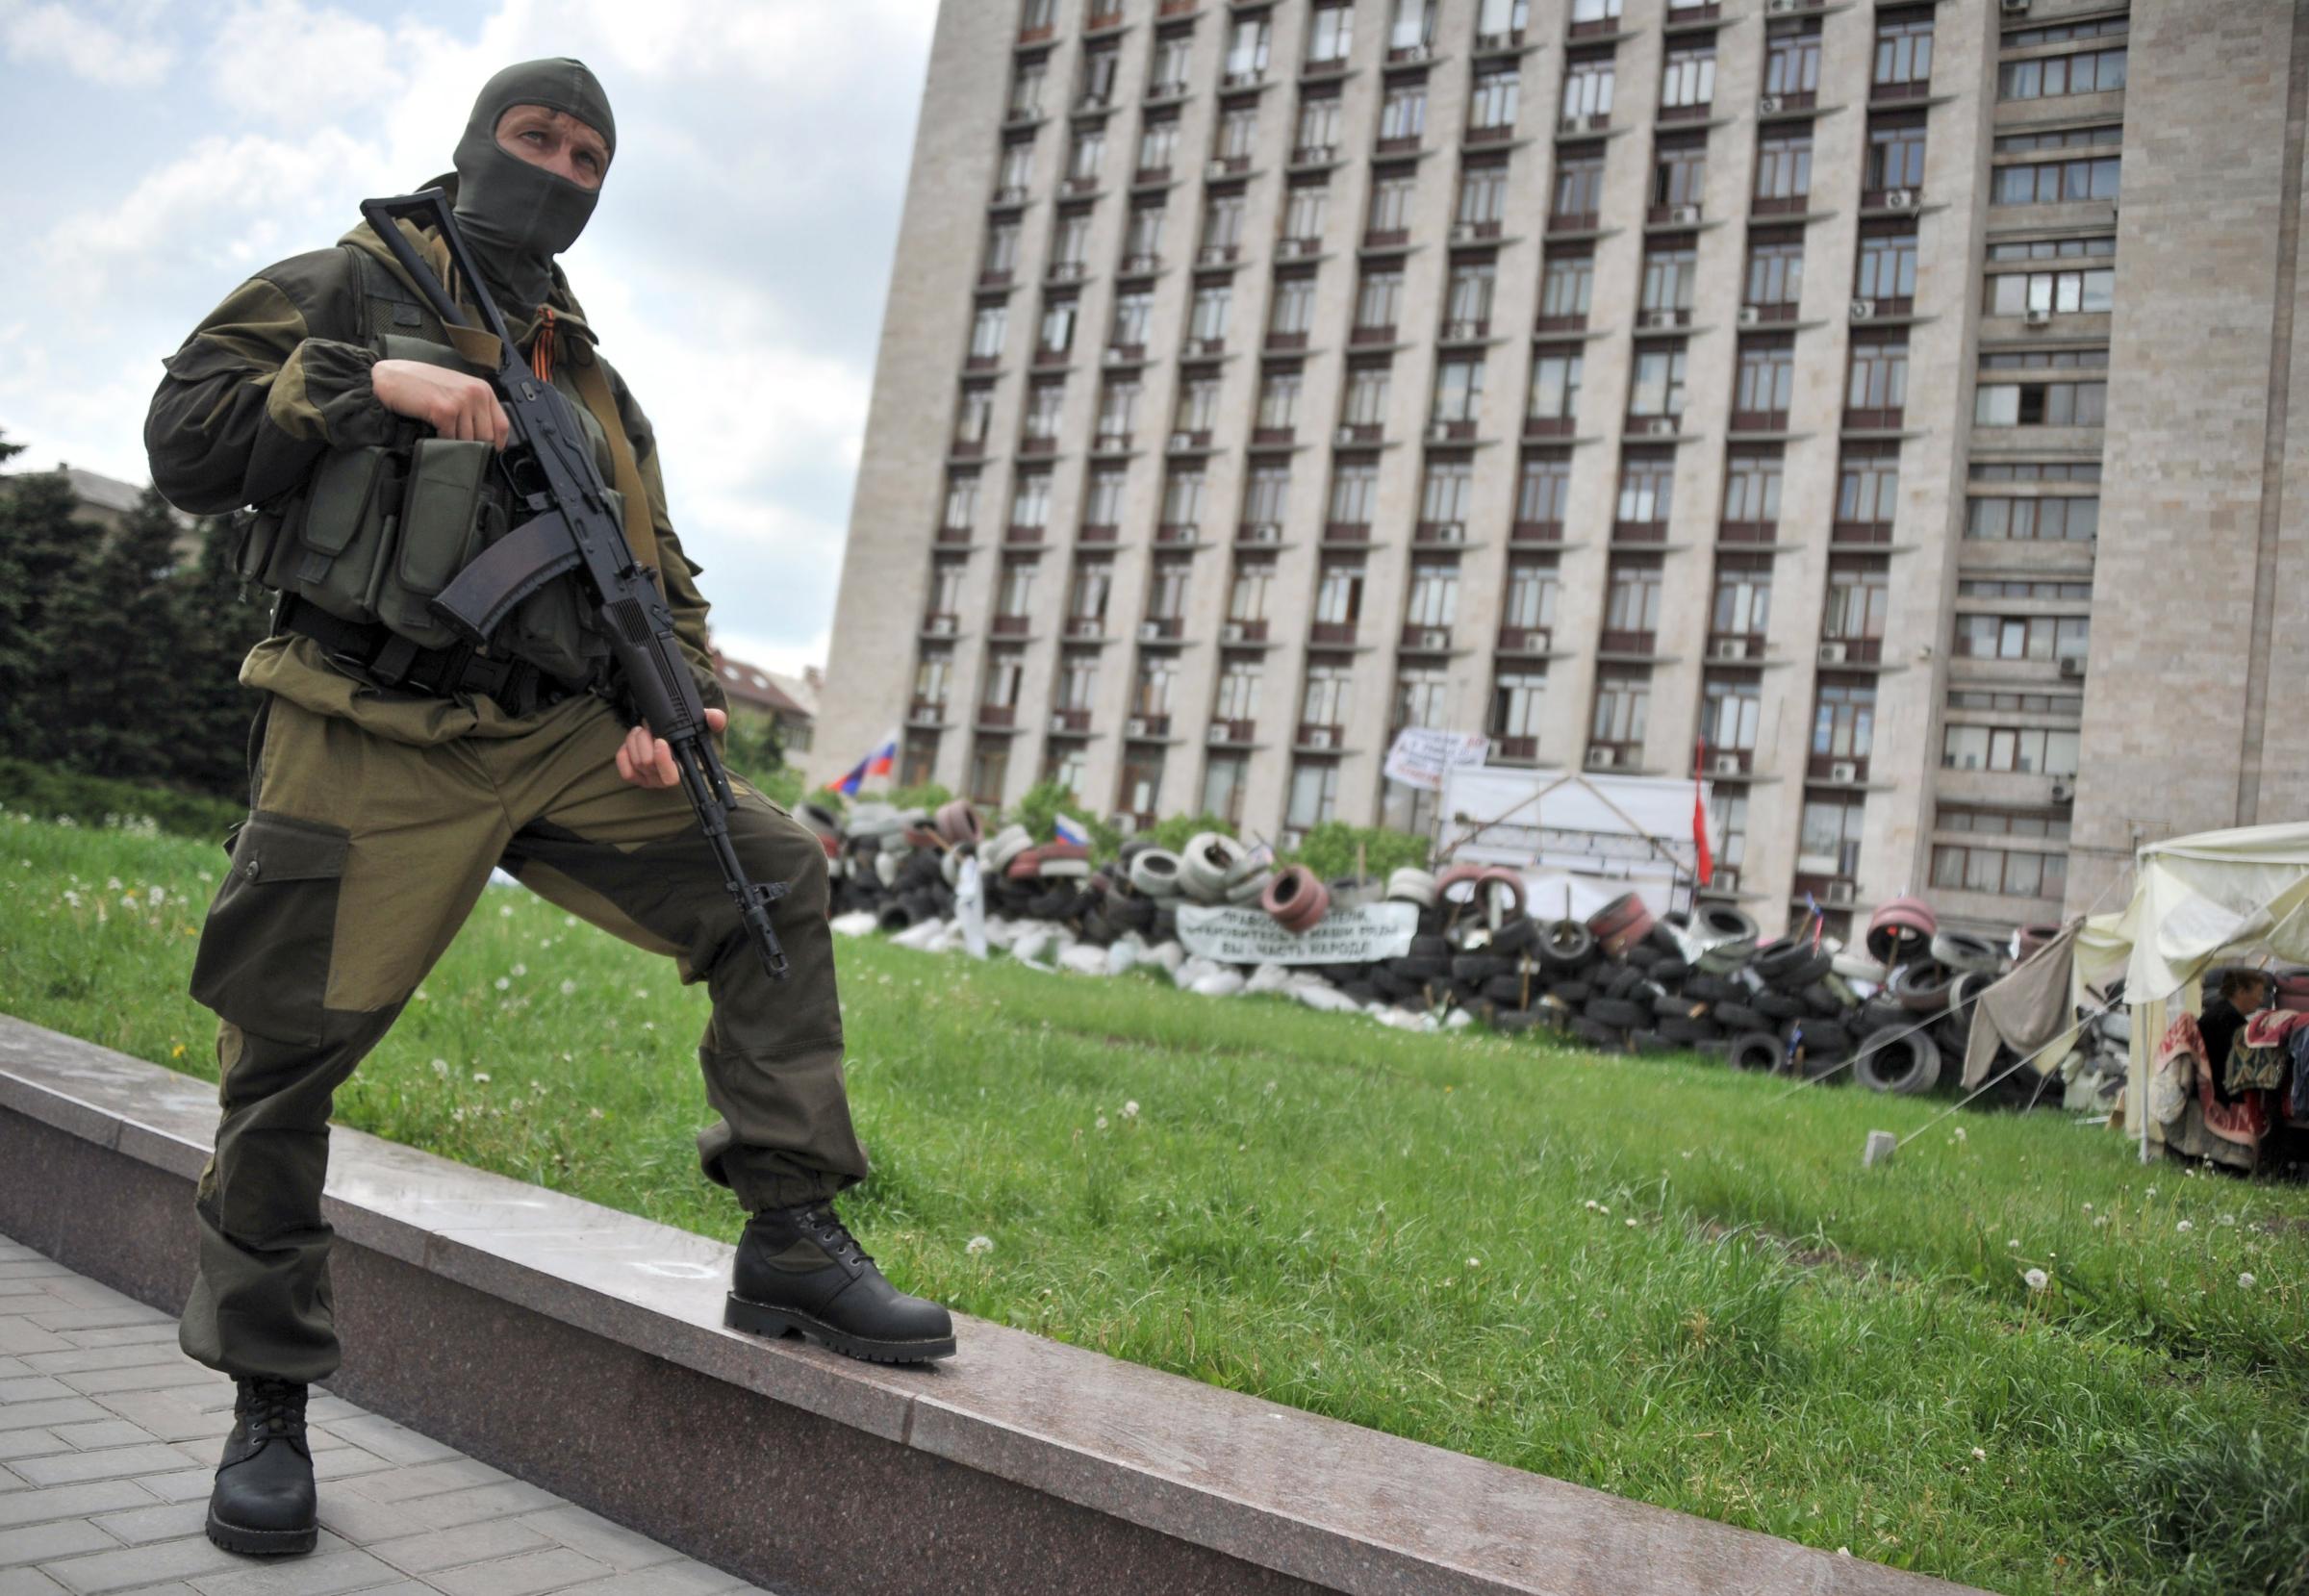 An armed pro-Russia militant stands guard as the self-styled governor of the so-called "People's Republic of Donetsk" speaks to the media near the regional state building seized by separatists in the centre of the eastern Ukrainian city of Donetsk on May 13, 2014.